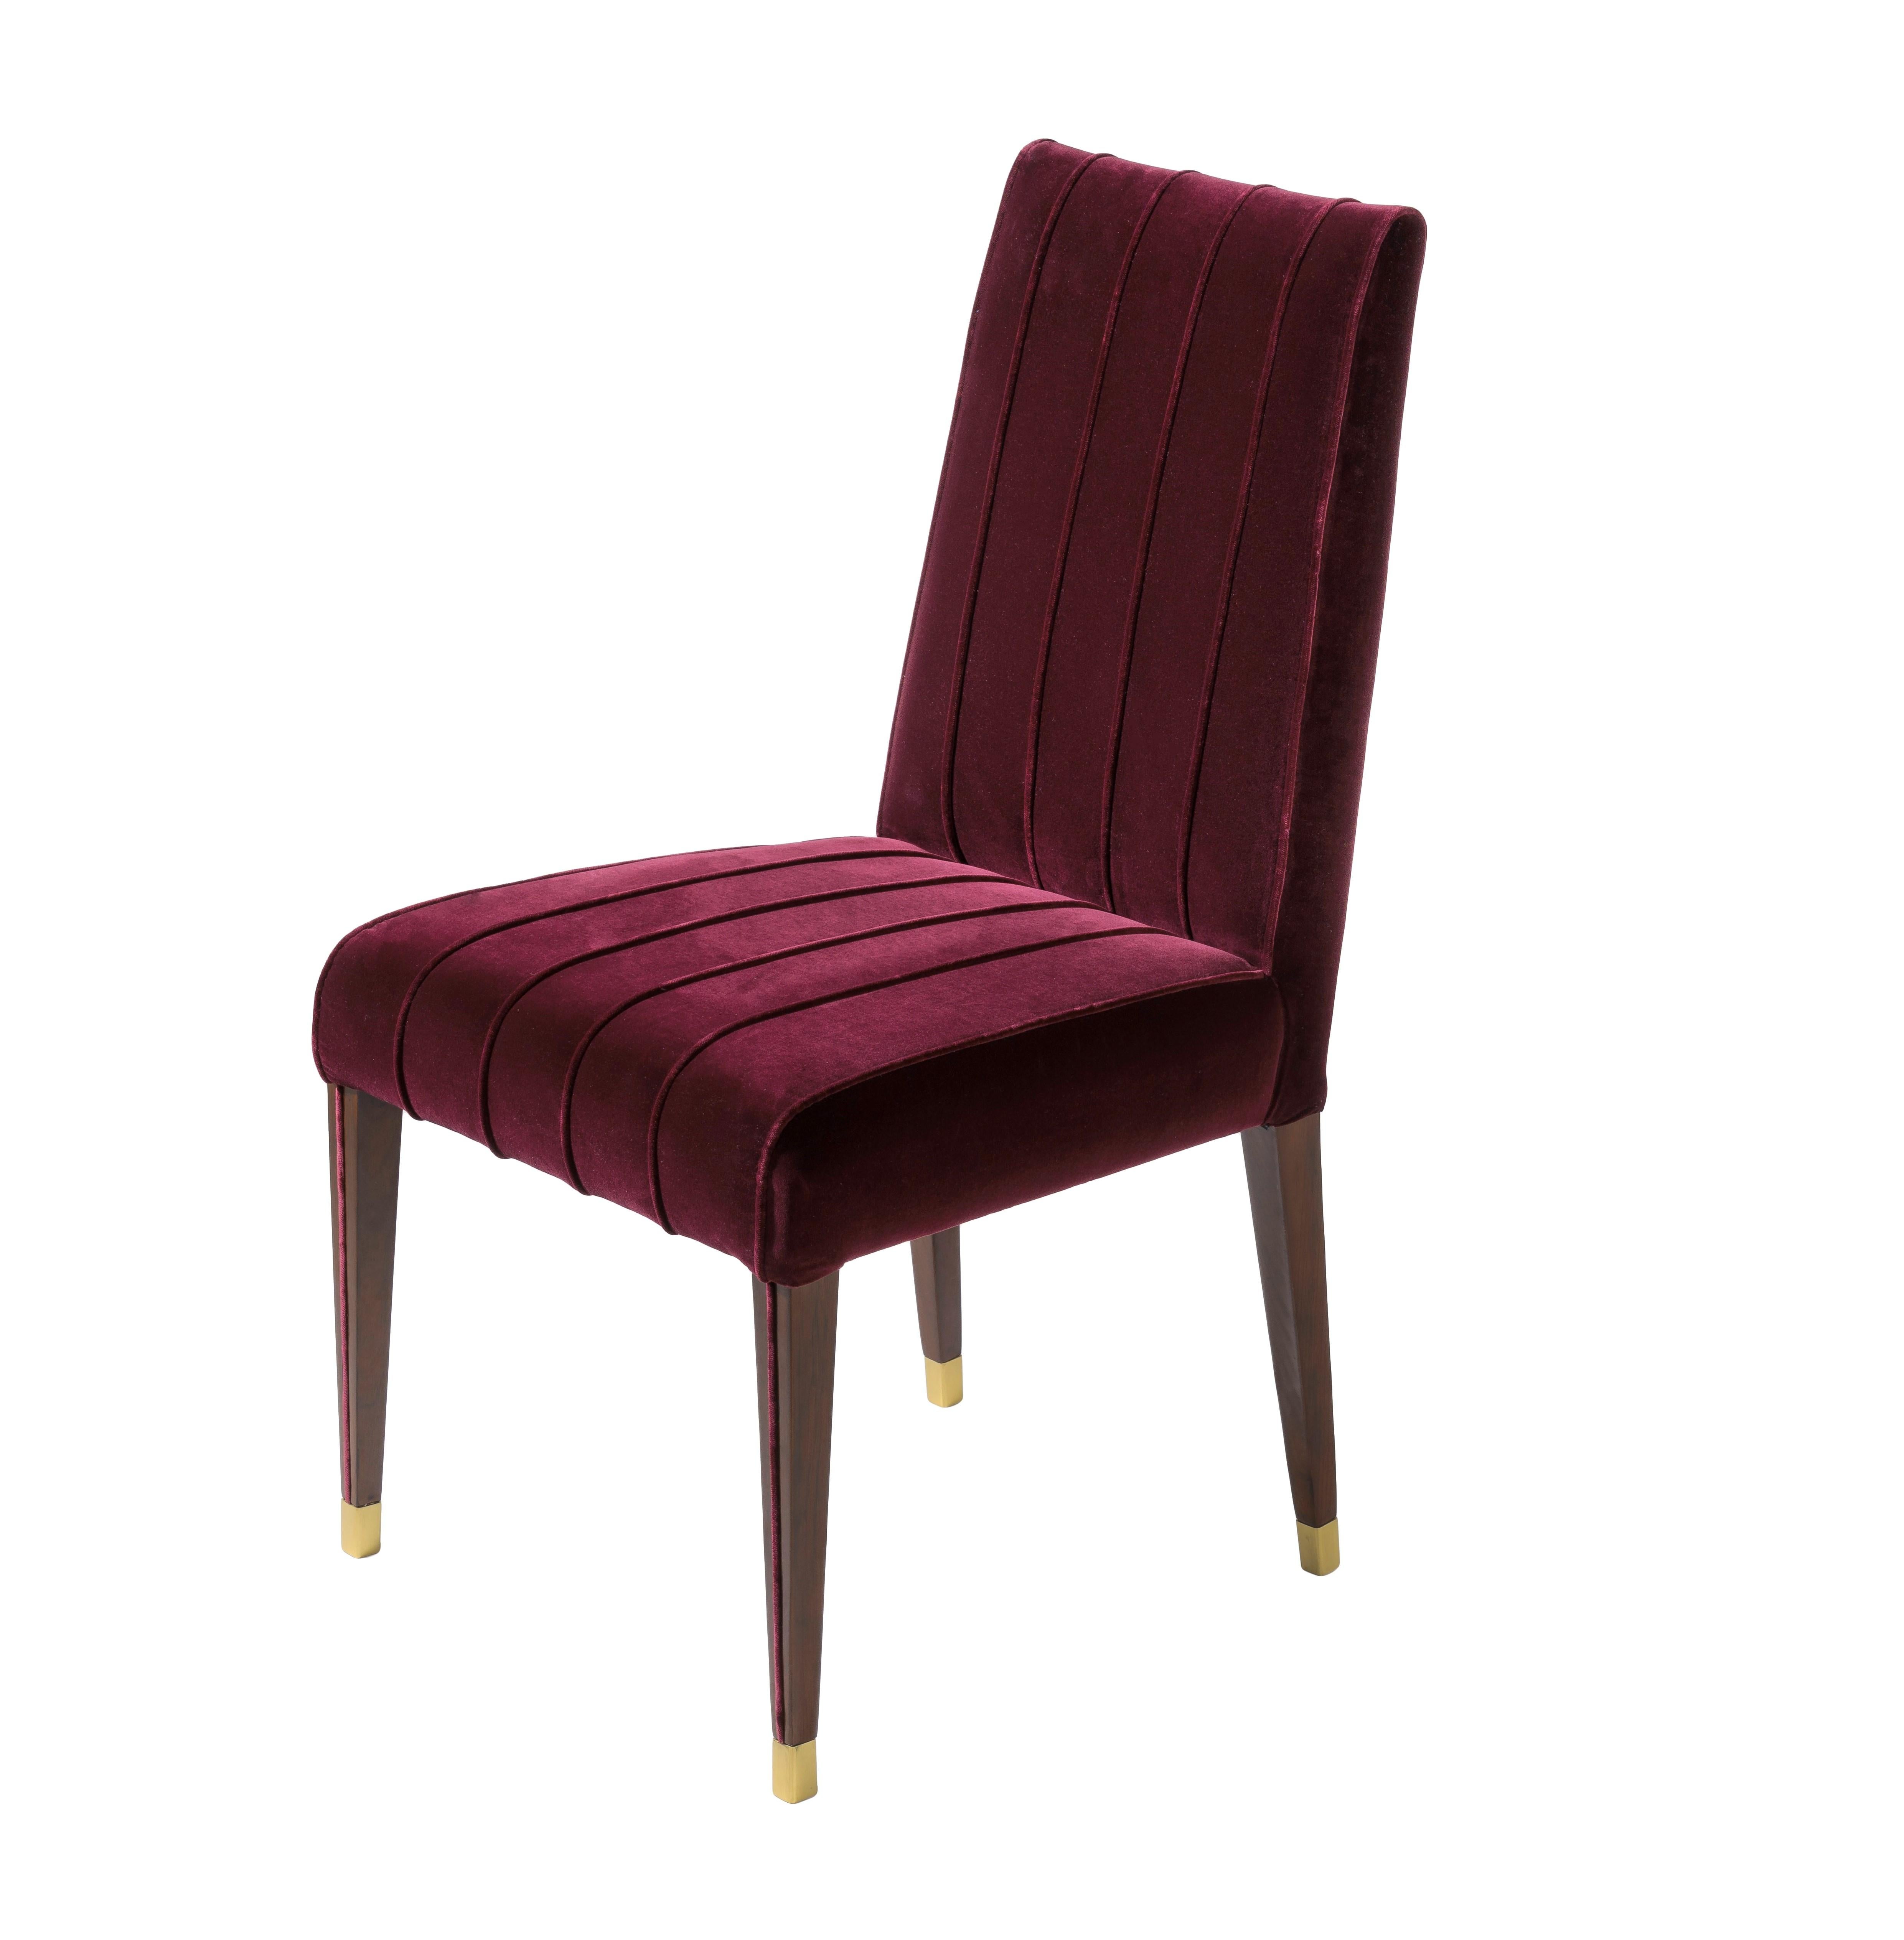 The classic style of the GLORIA dining chair makes it suitable for most dining concepts.‎ With piping detail that runs along the legs, continuing to the seat and back of the chair, bringing a balanced look to this consensual piece.‎ Gloria is